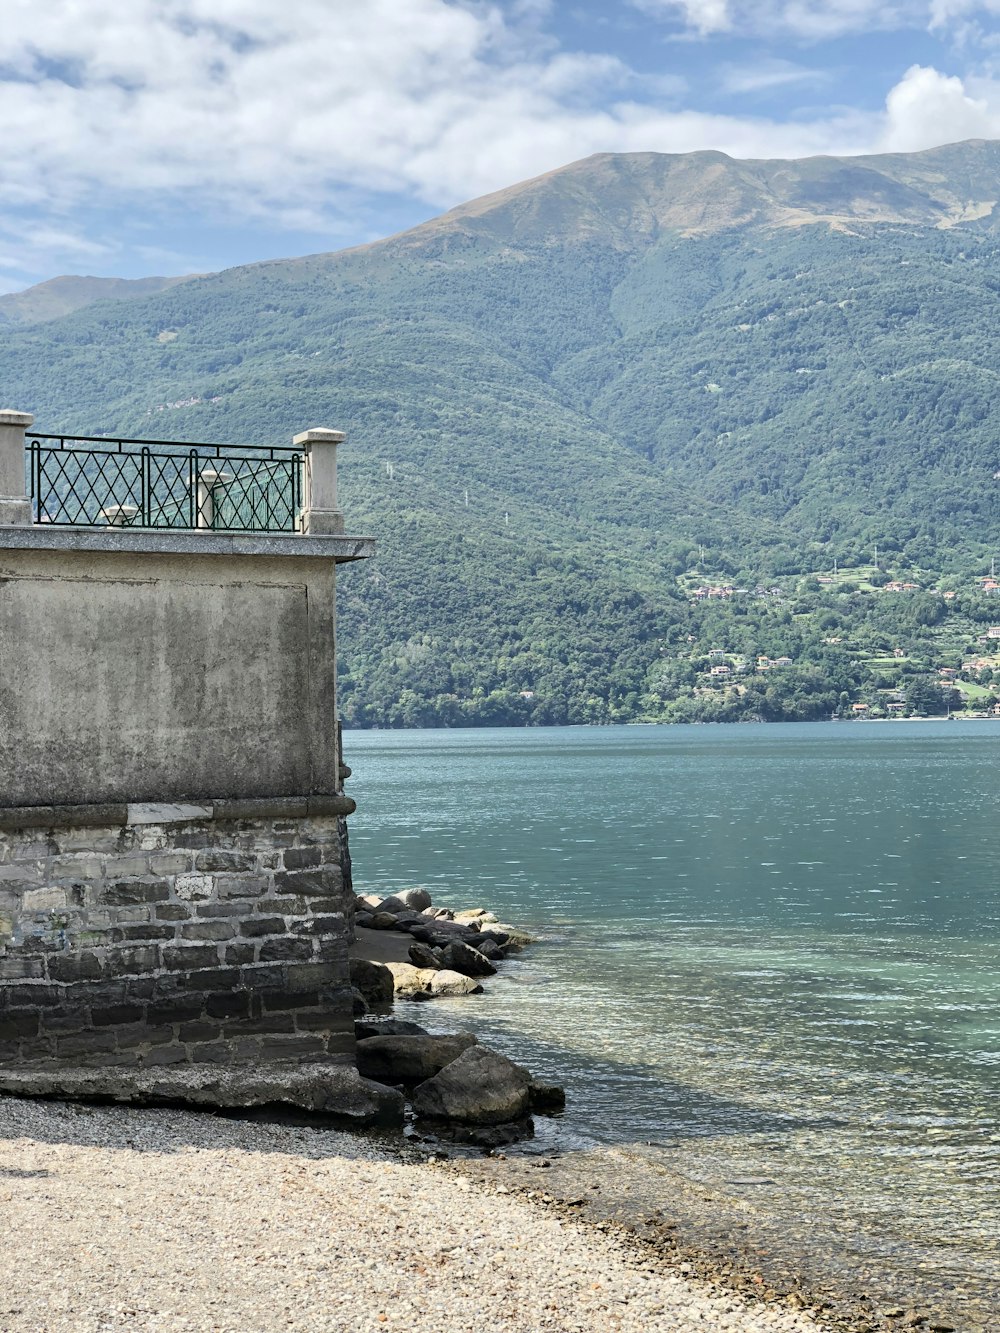 a clock tower sitting on top of a stone wall next to a body of water